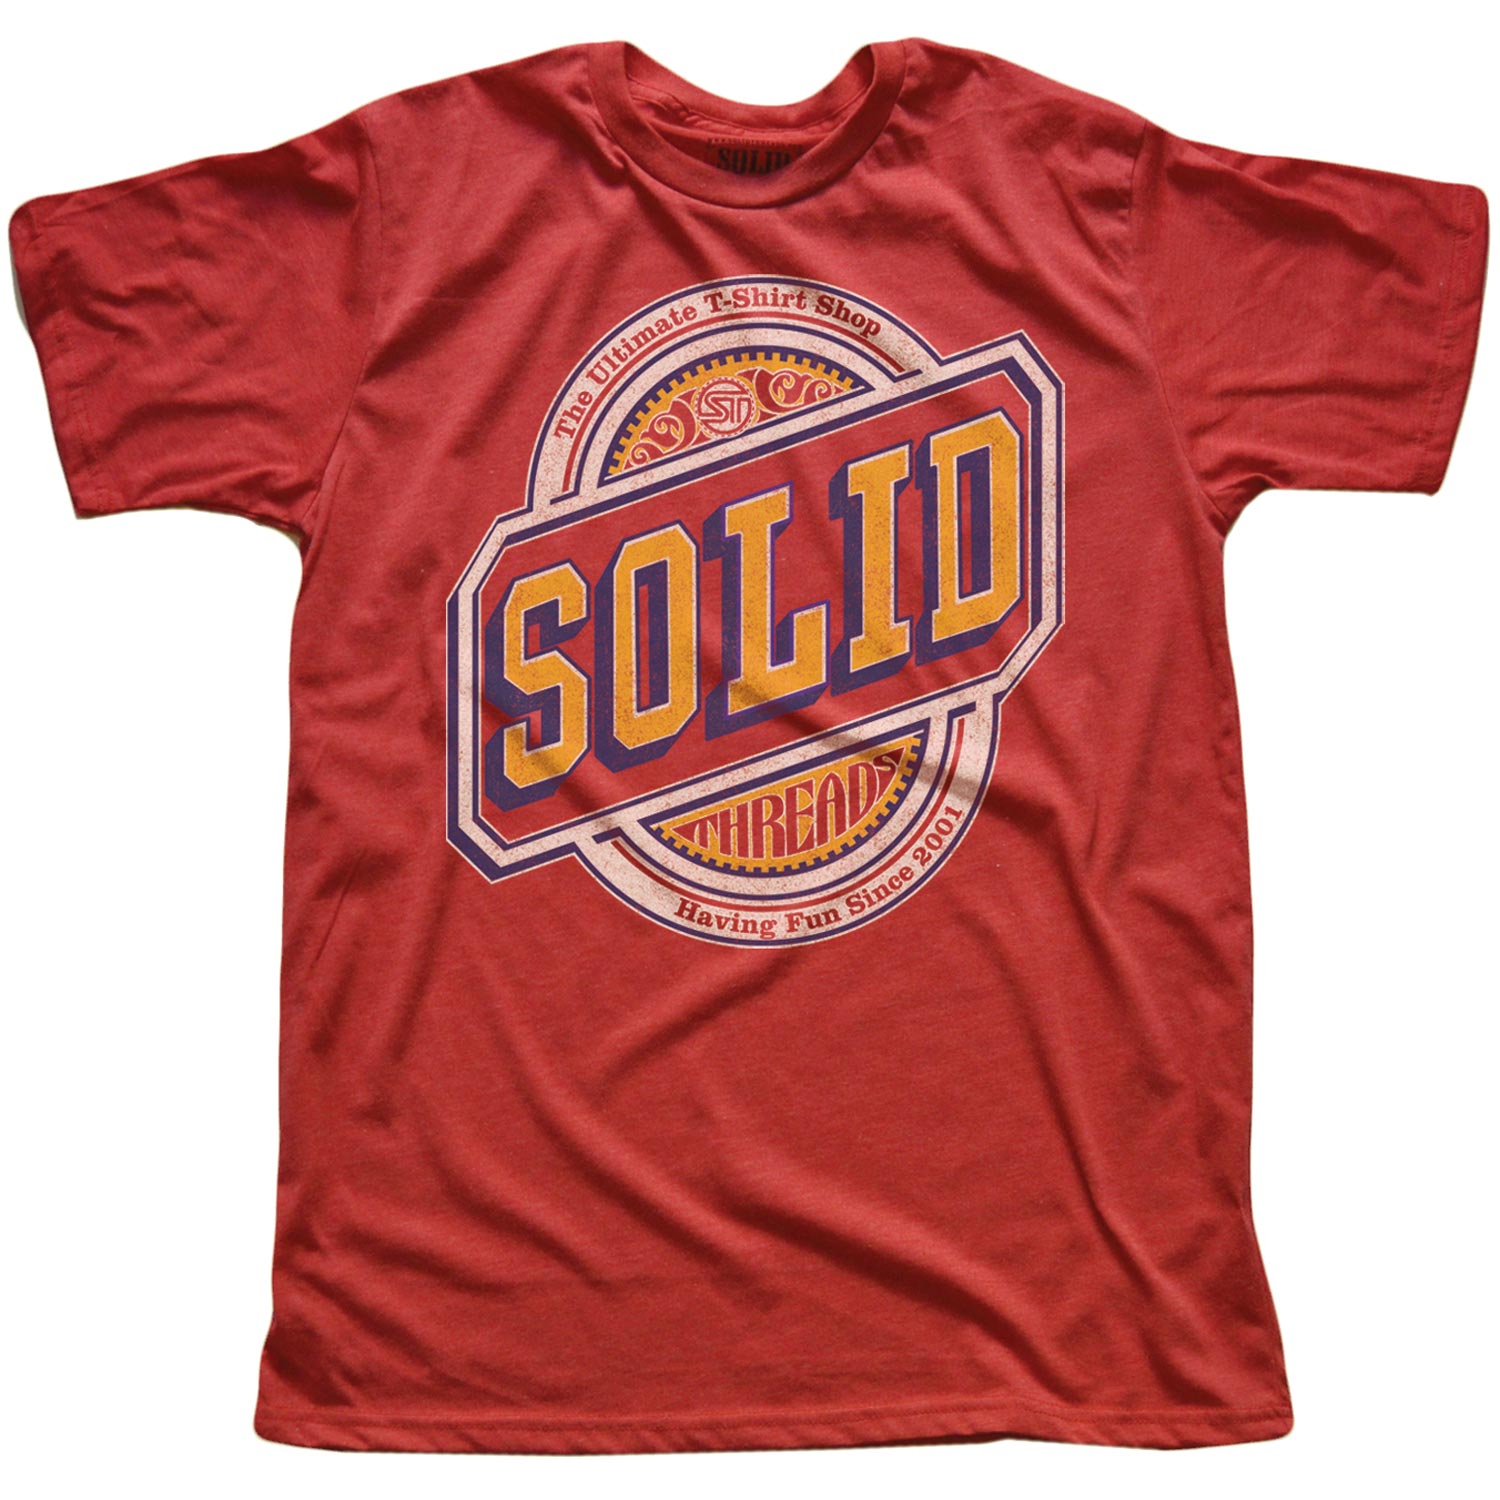 Men's Solid Threads Logo Cool Graphic T-Shirt | Vintage Craft Beer Label Soft Tee | Solid Threads